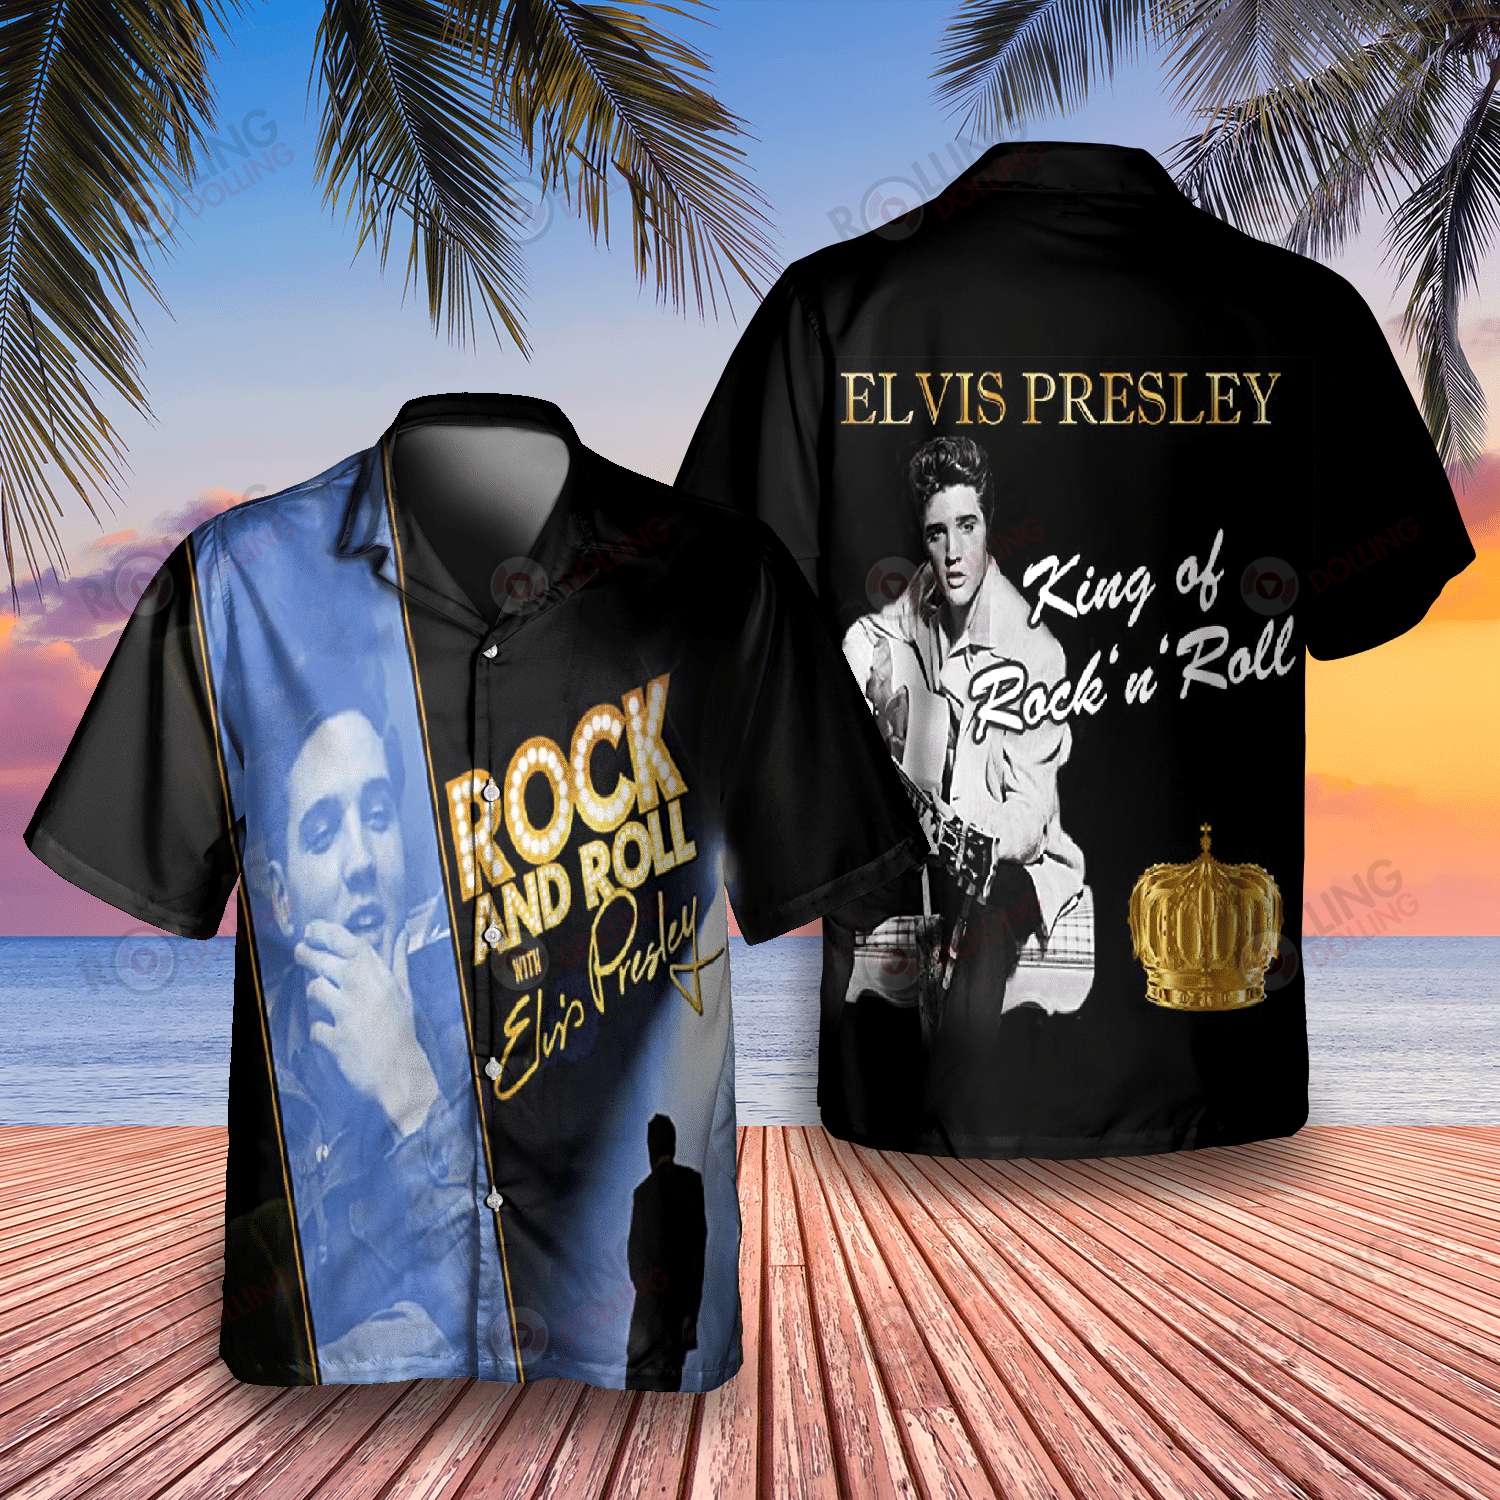 HOT Elvis Presley King of Rock And Roll Album Tropical Shirt1